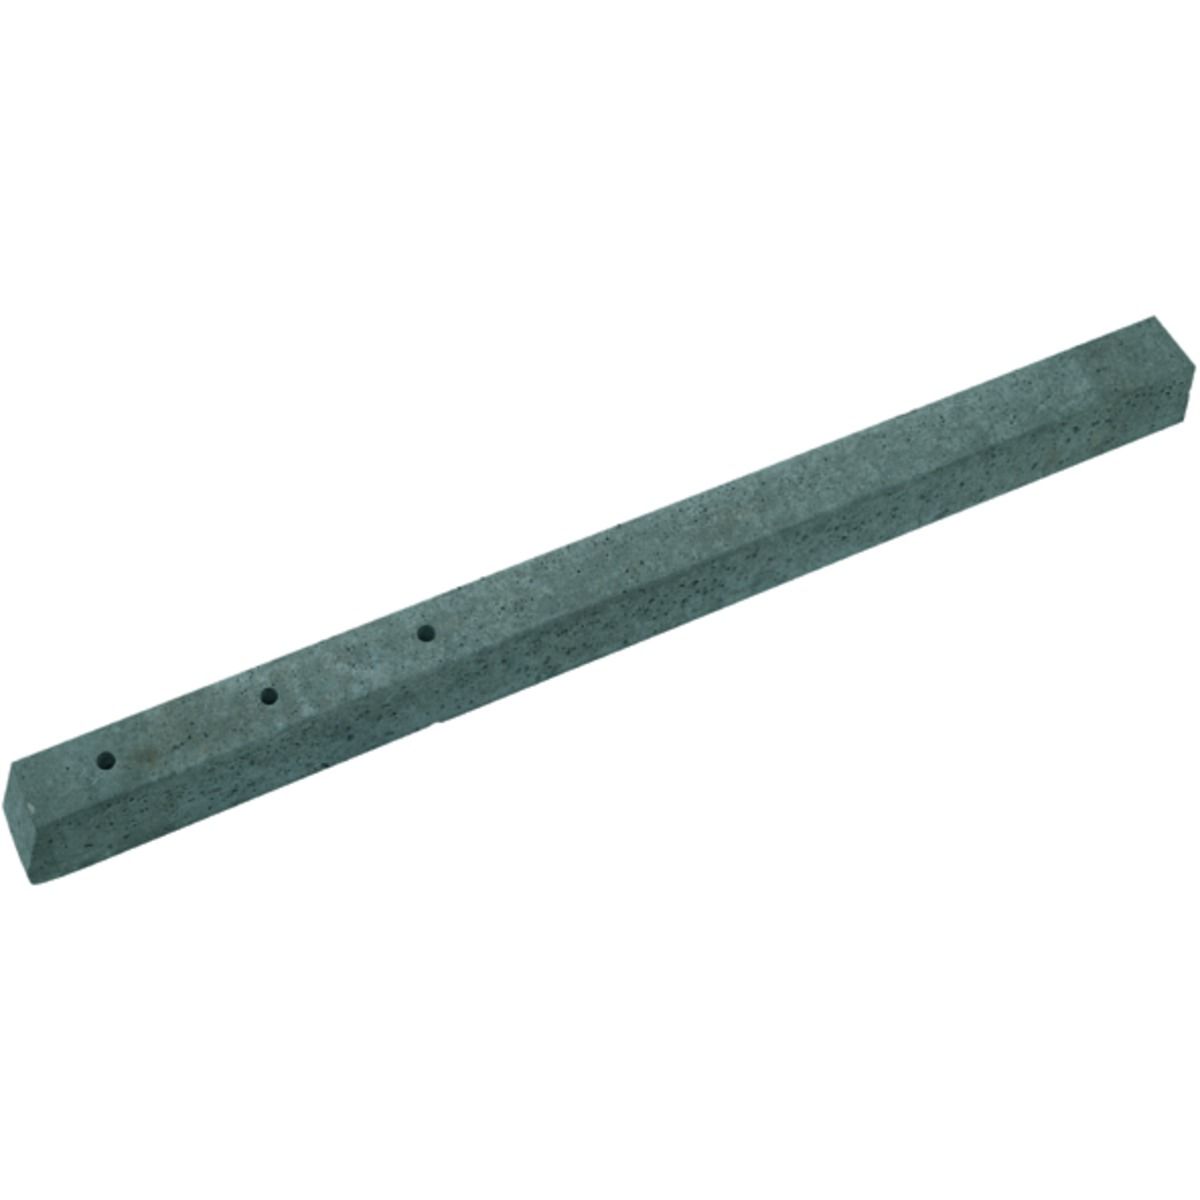 Image of Wickes Fence Concrete Repair Spur - 75mm x 100mm x 1200mm